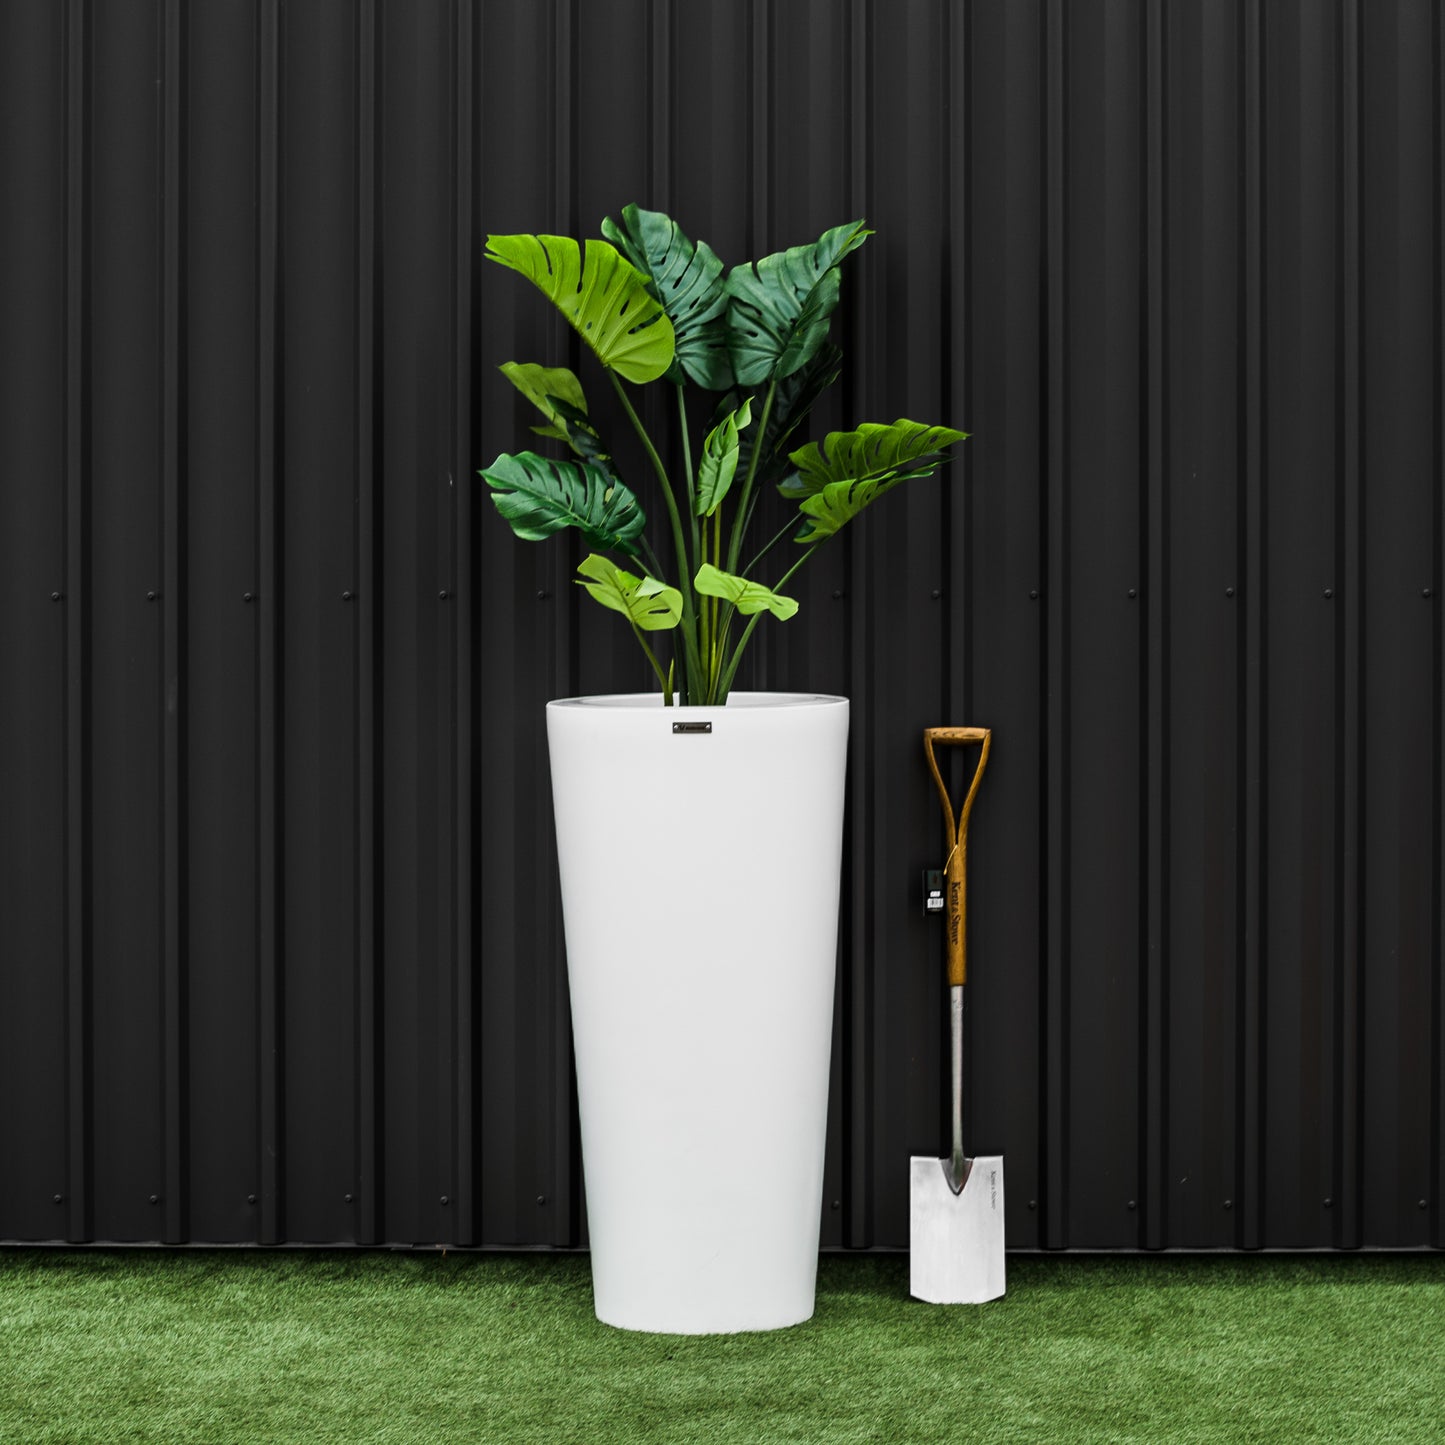 A large white Modscene planter pot on a lawn in front of a building wall. The planter is a large white modern planter and is New Zealand made.